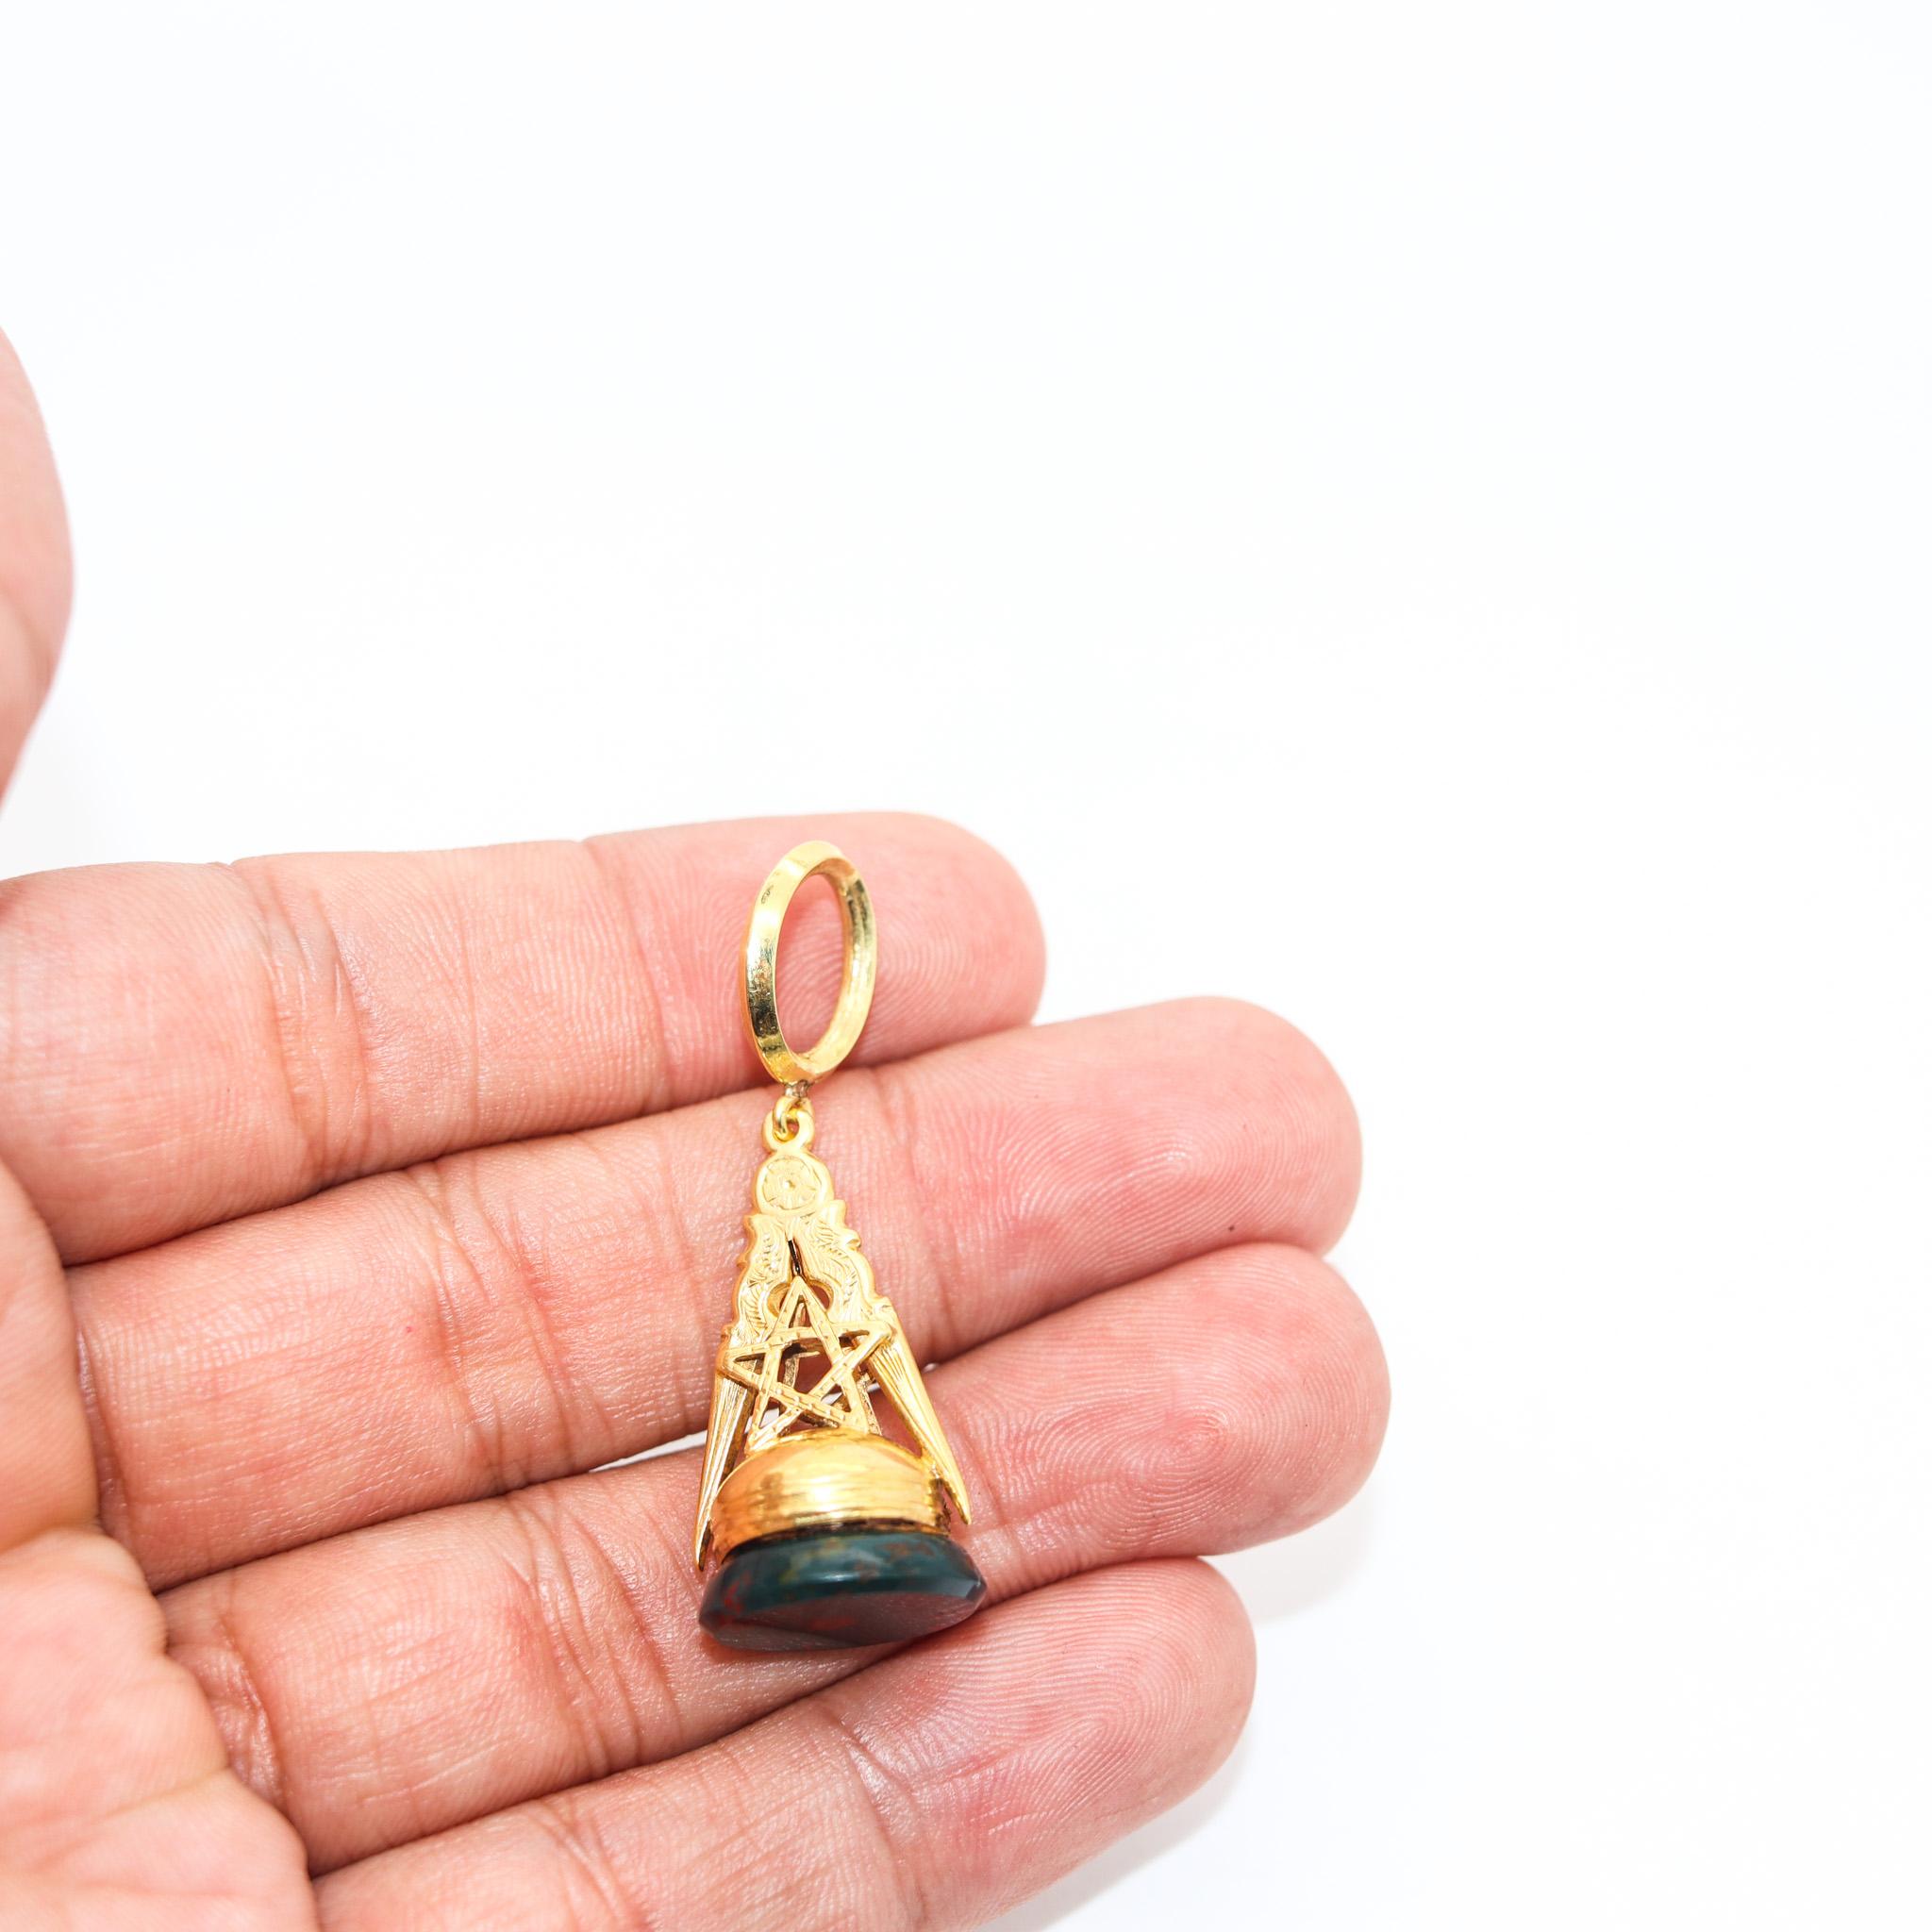 Cabochon Victorian 1890 Masonic Seal Fob Pendant In 14Kt Gold With Plain Bloodstone For Sale